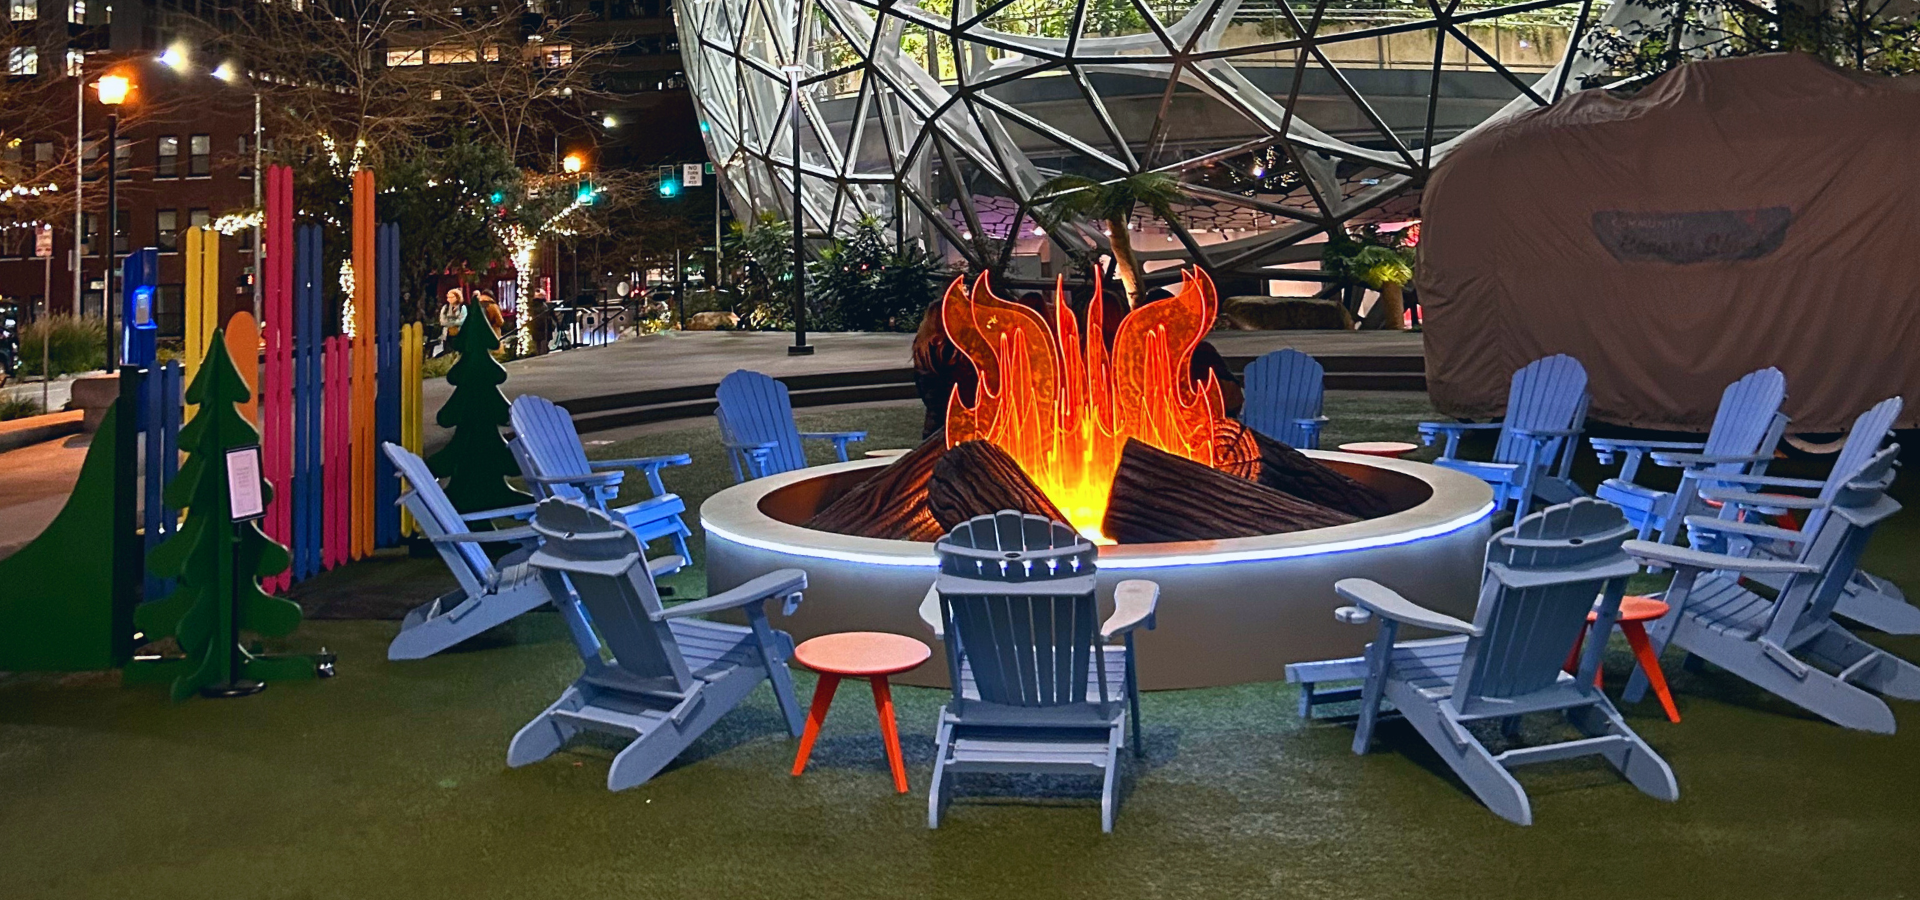 Corporate plaza with a campfire set up for patrons.